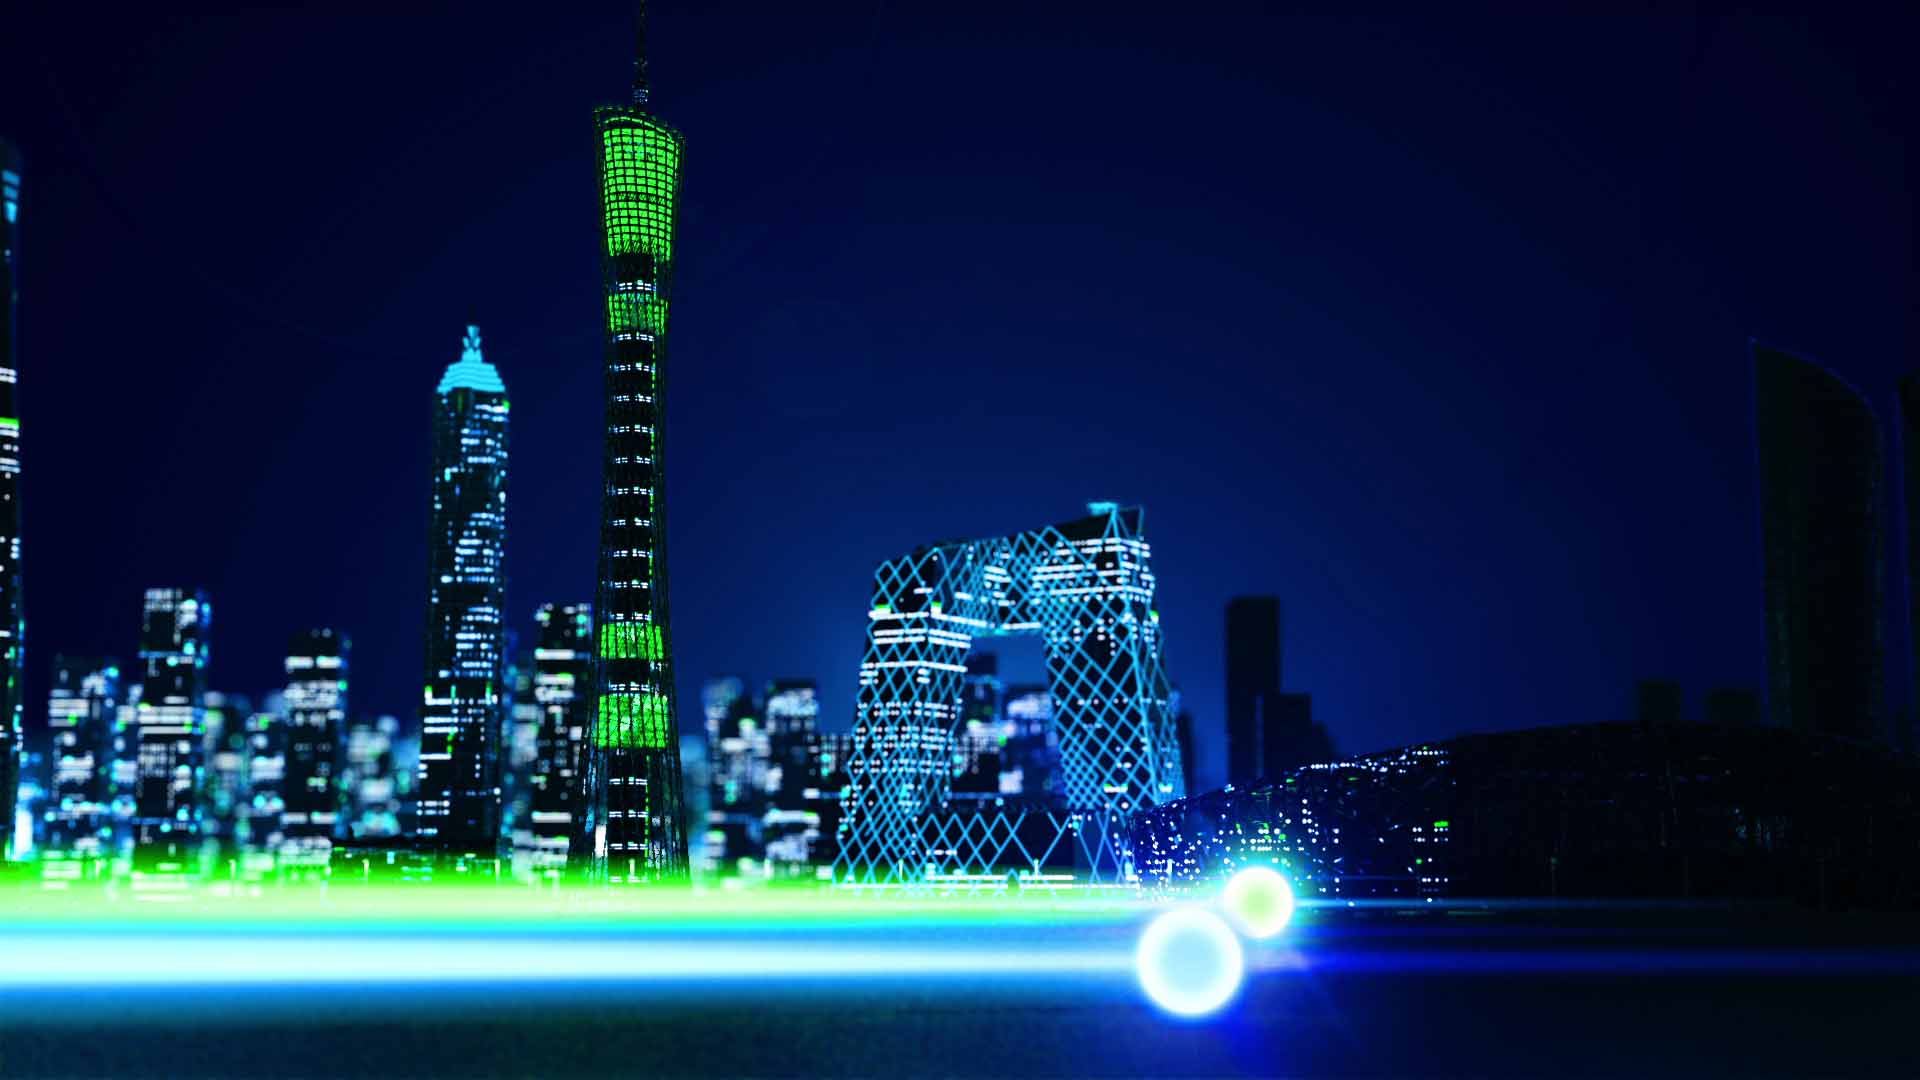 Two animated glowing spheres with light trails fly past Chinese landmarks